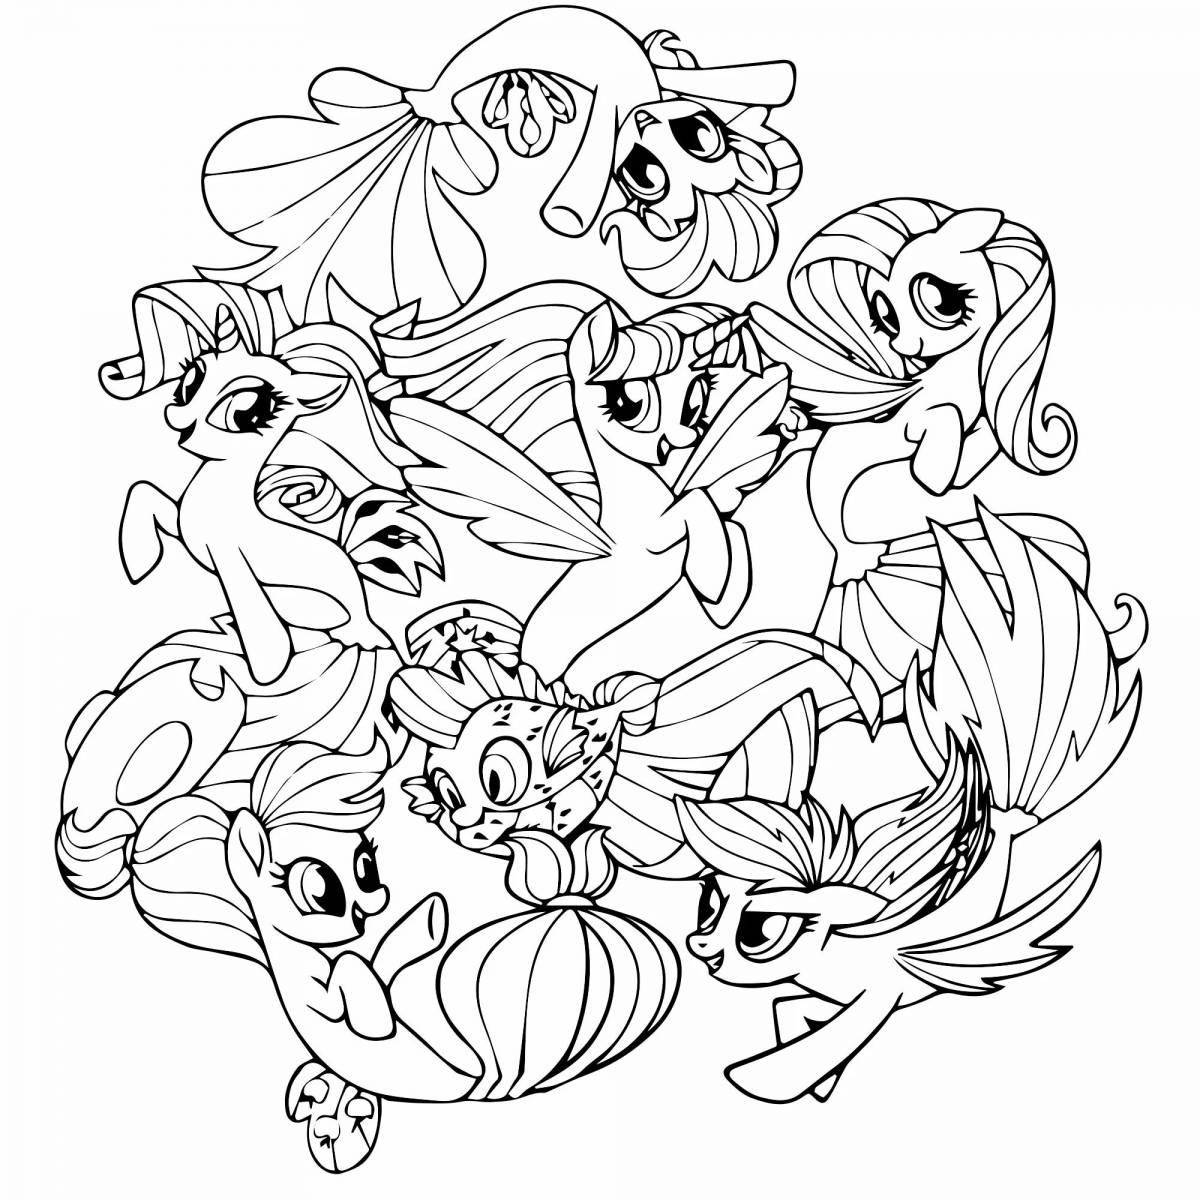 Big pony coloring pages